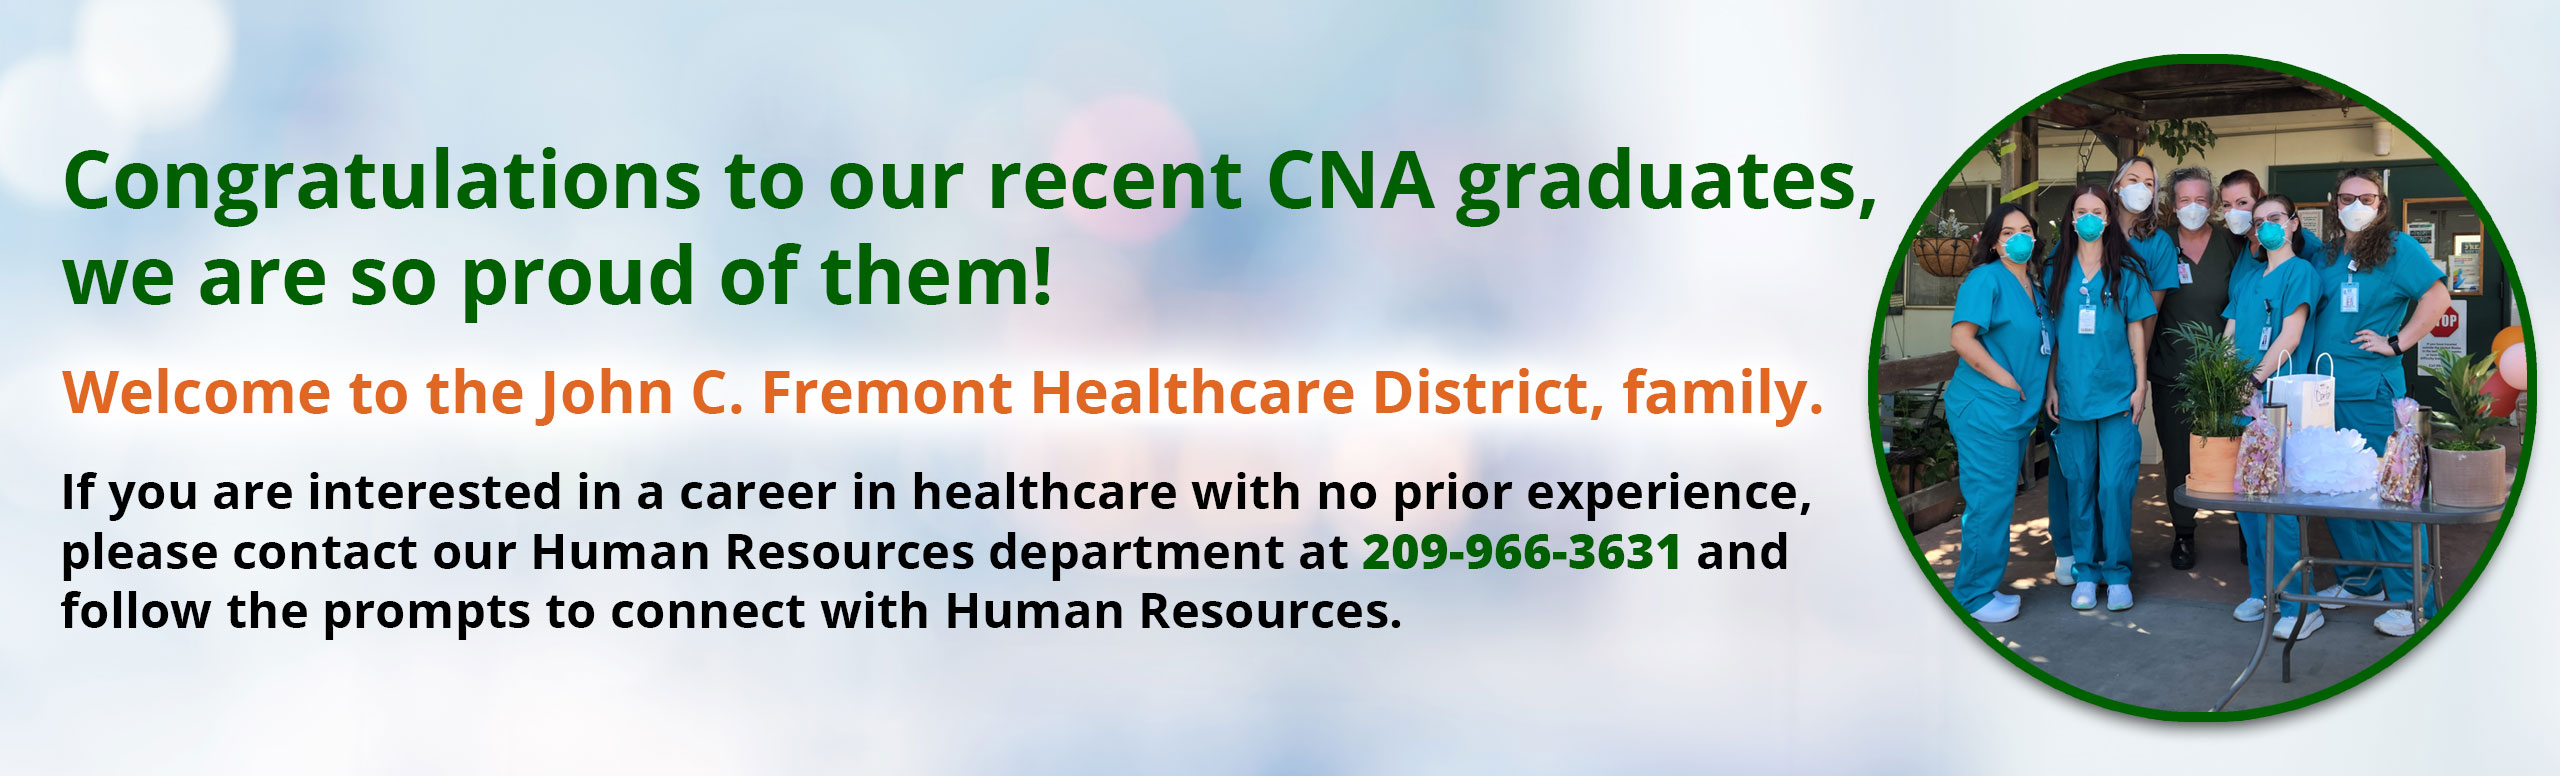 Banner picture of 7 female CNA grad students standing outside wearing scrubs and masks. There is a table in front of them that has two plants and some gifts on it. 

Banner says:

Congratulations to our recent CNA graduates, we are so proud of them!

Welcome to the John C. Fremont Healthcare District, family.

If you are interested in a career in healthcare with prior experience, please contact our Human Resources department at 209-966-3631 and follow the prompts to connect with Human Resources.